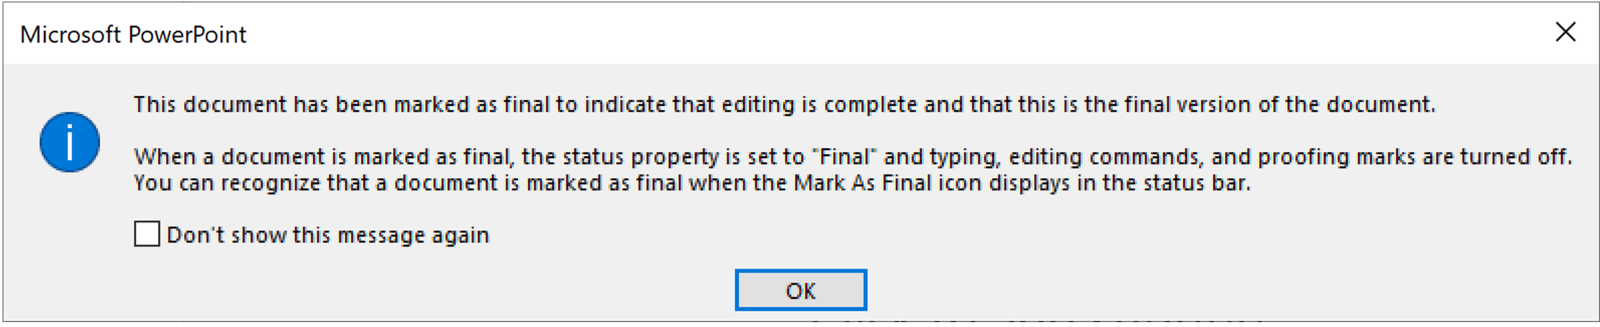 Pop up confirming the PowerPoint has been marked as final. 